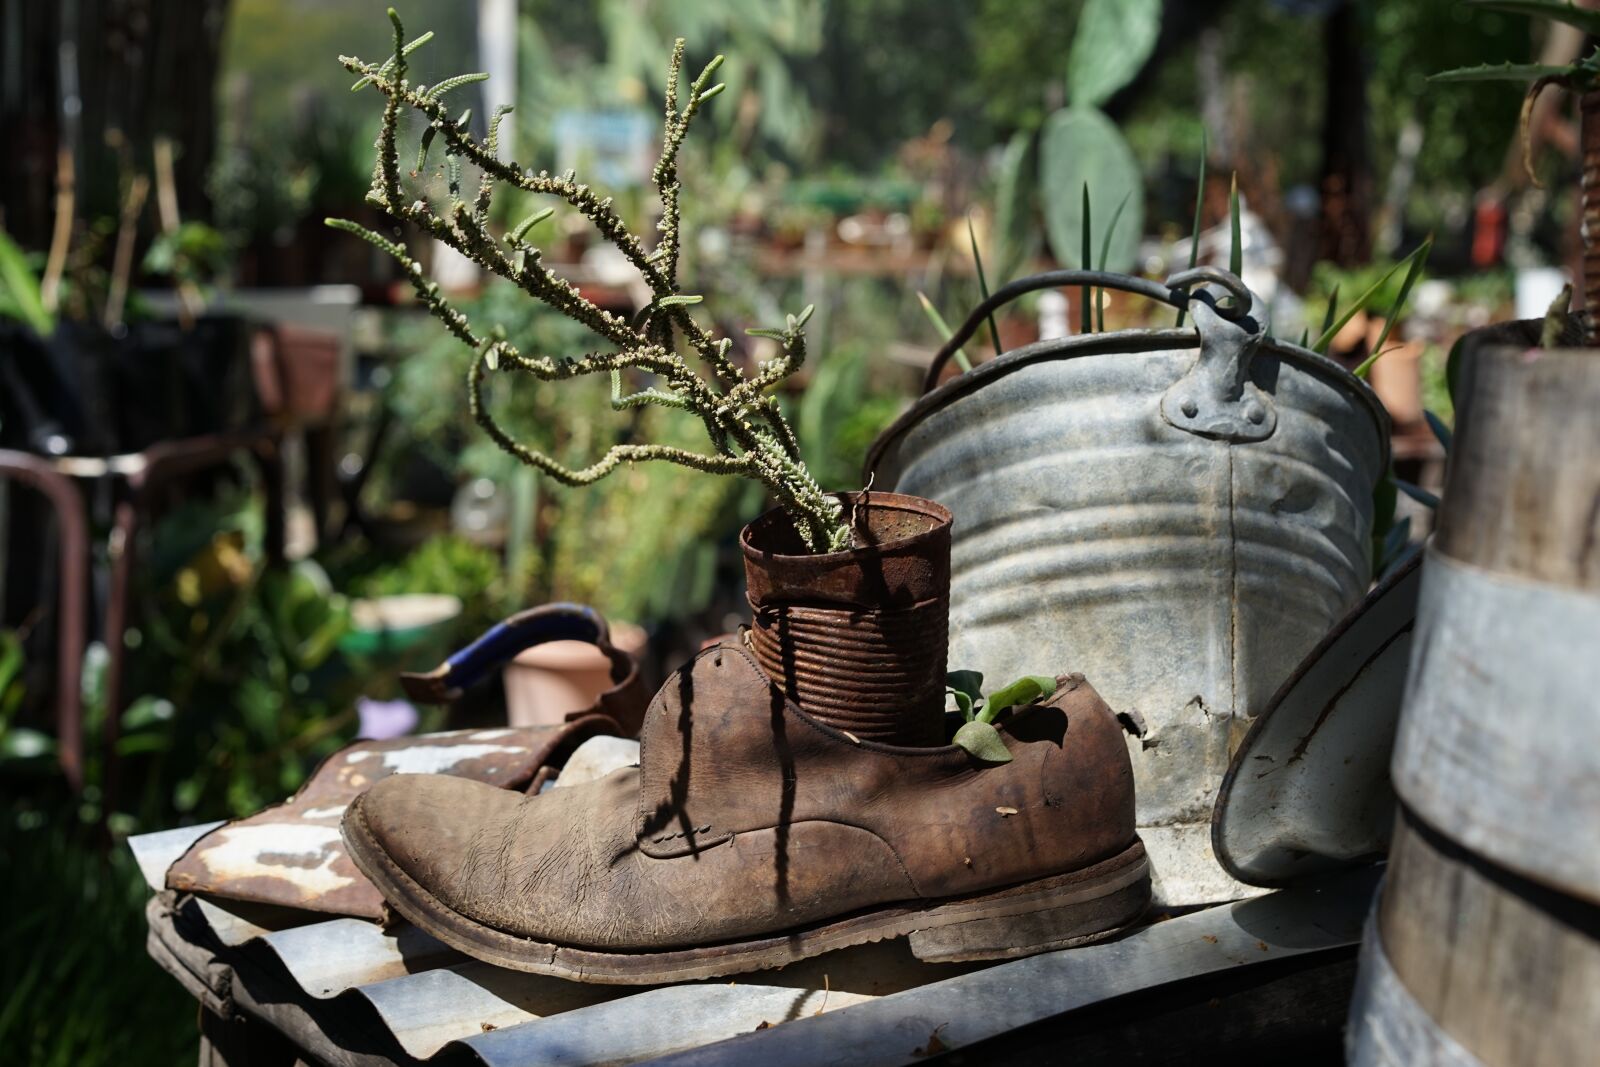 Sony a7 sample photo. Shoe, nature, plant photography